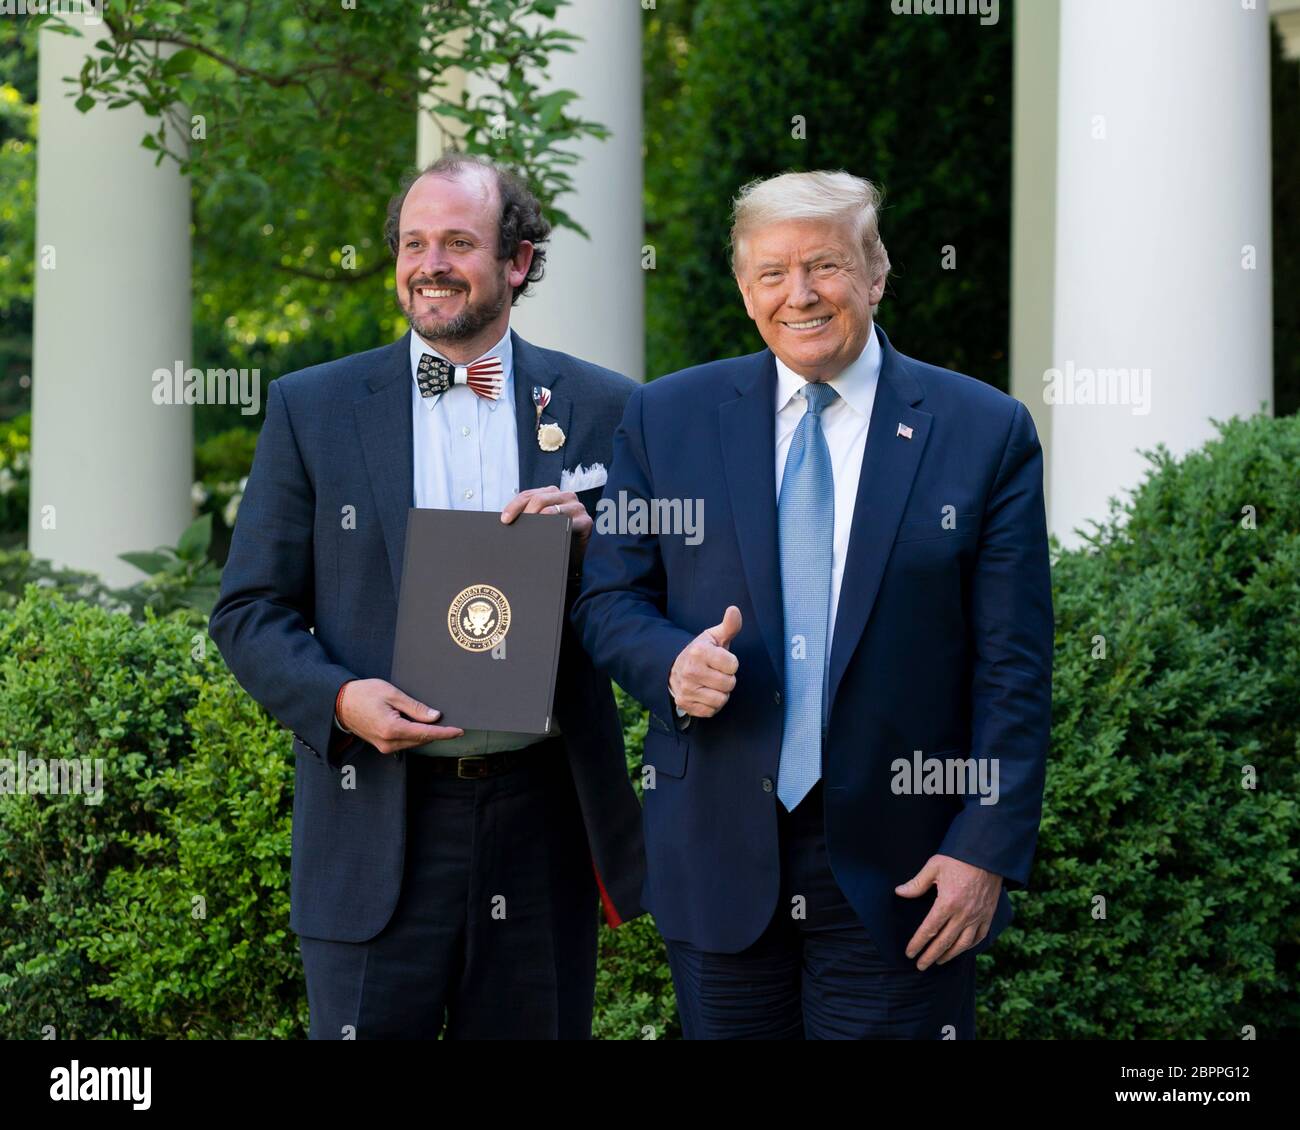 U.S. President Donald Trump presents Ben Ross, with a certificate of recognition during the Presidential Recognition Ceremony: Hard Work, Heroism, and Hope in the Rose Garden of the White House May 15, 2020 in Washington, D.C. The event honored front line workers battling the COVID-19, coronavirus pandemic. Stock Photo